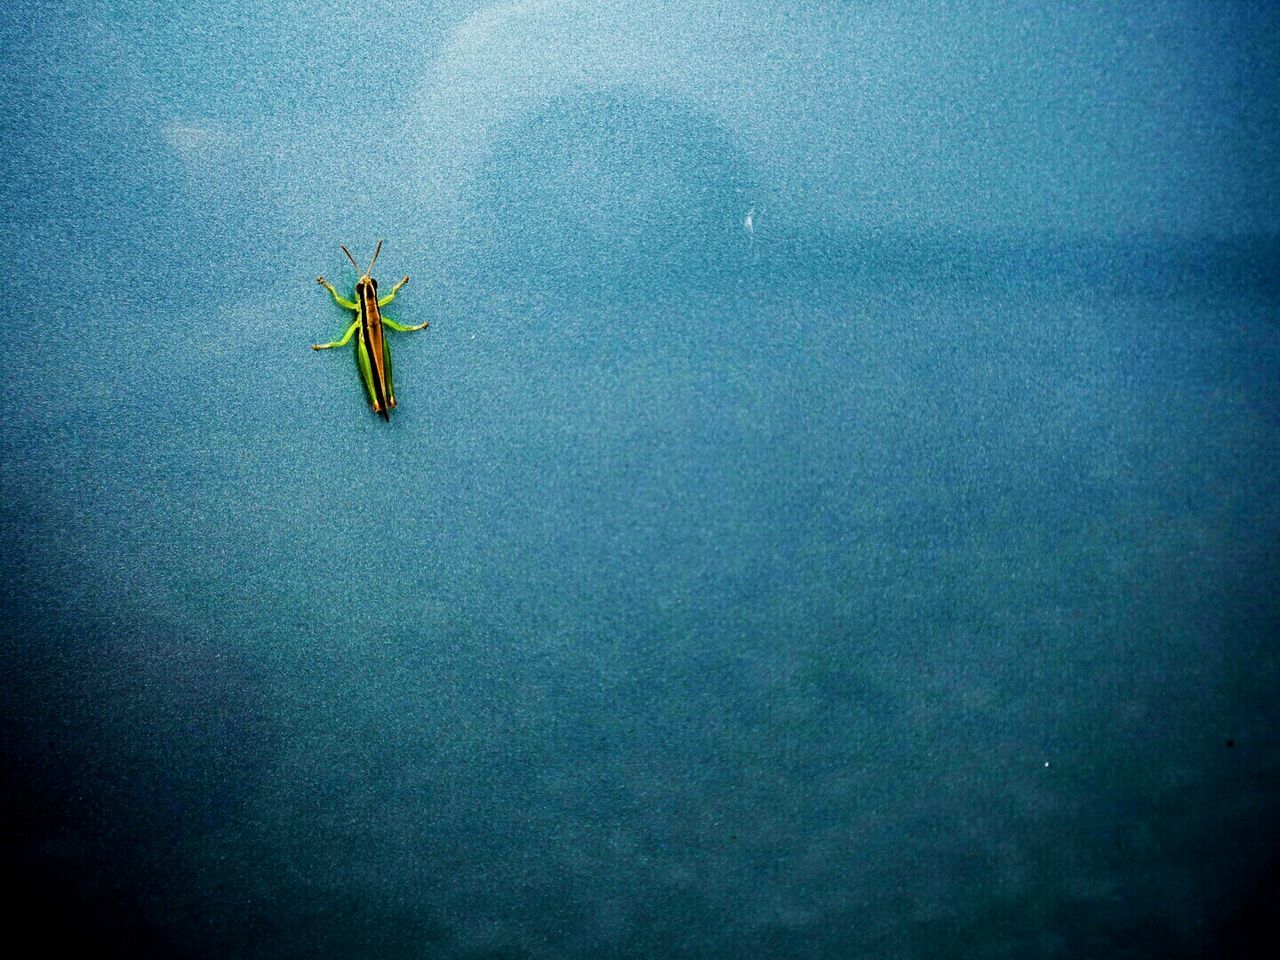 CLOSE-UP OF INSECT ON BLUE WATER